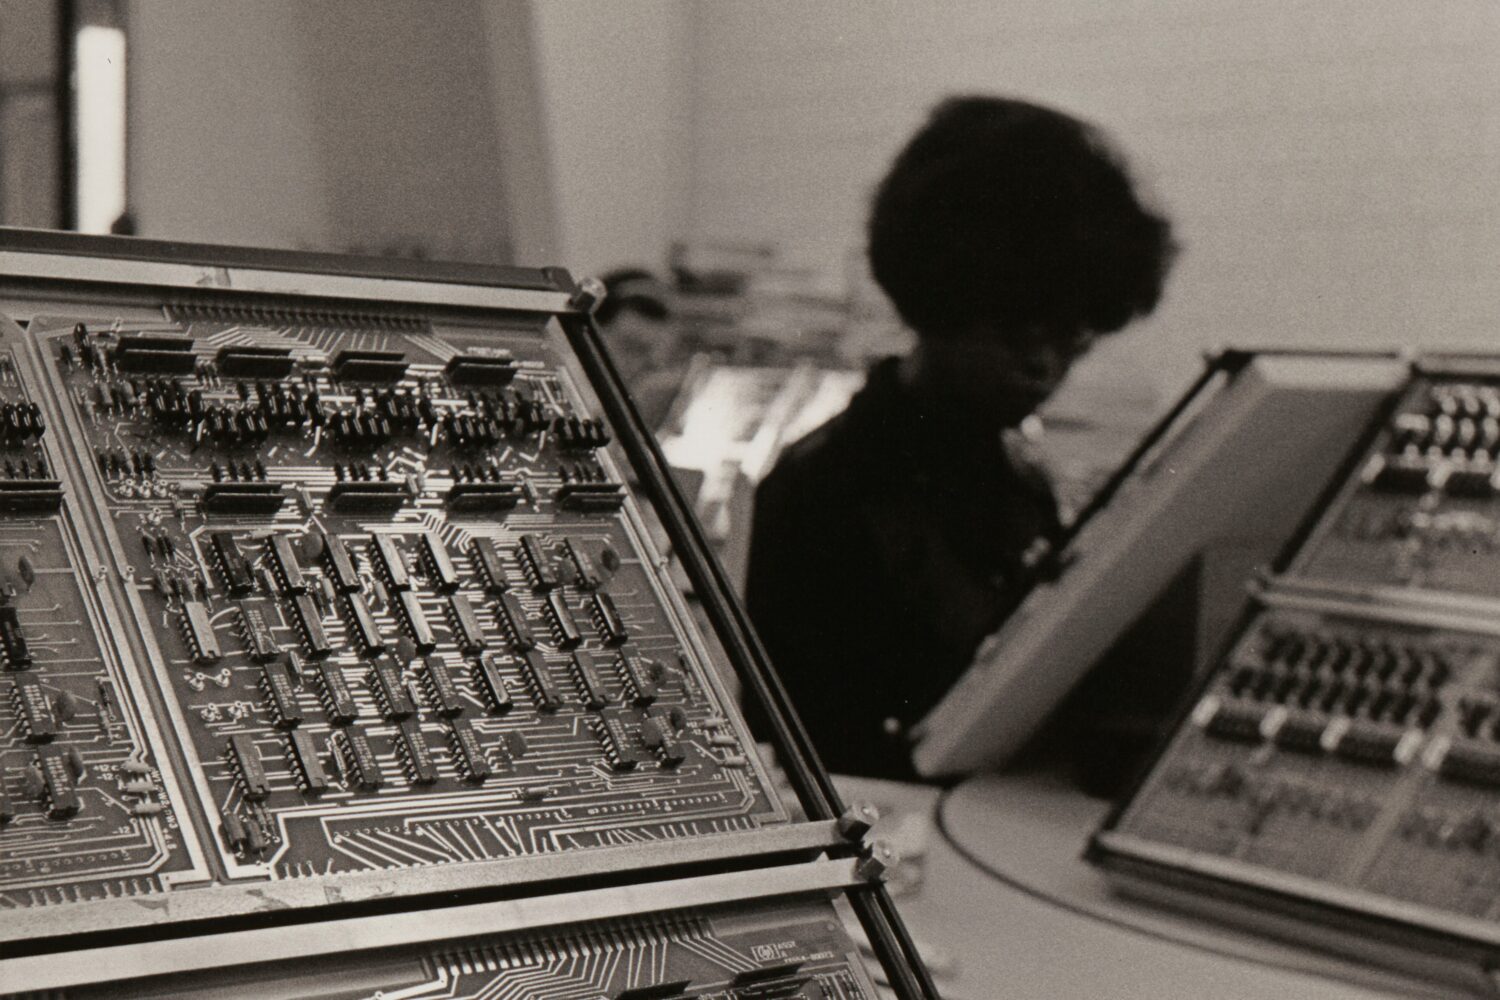 A photo of two computer circuit boards in the foreground and HP employee working in the background.